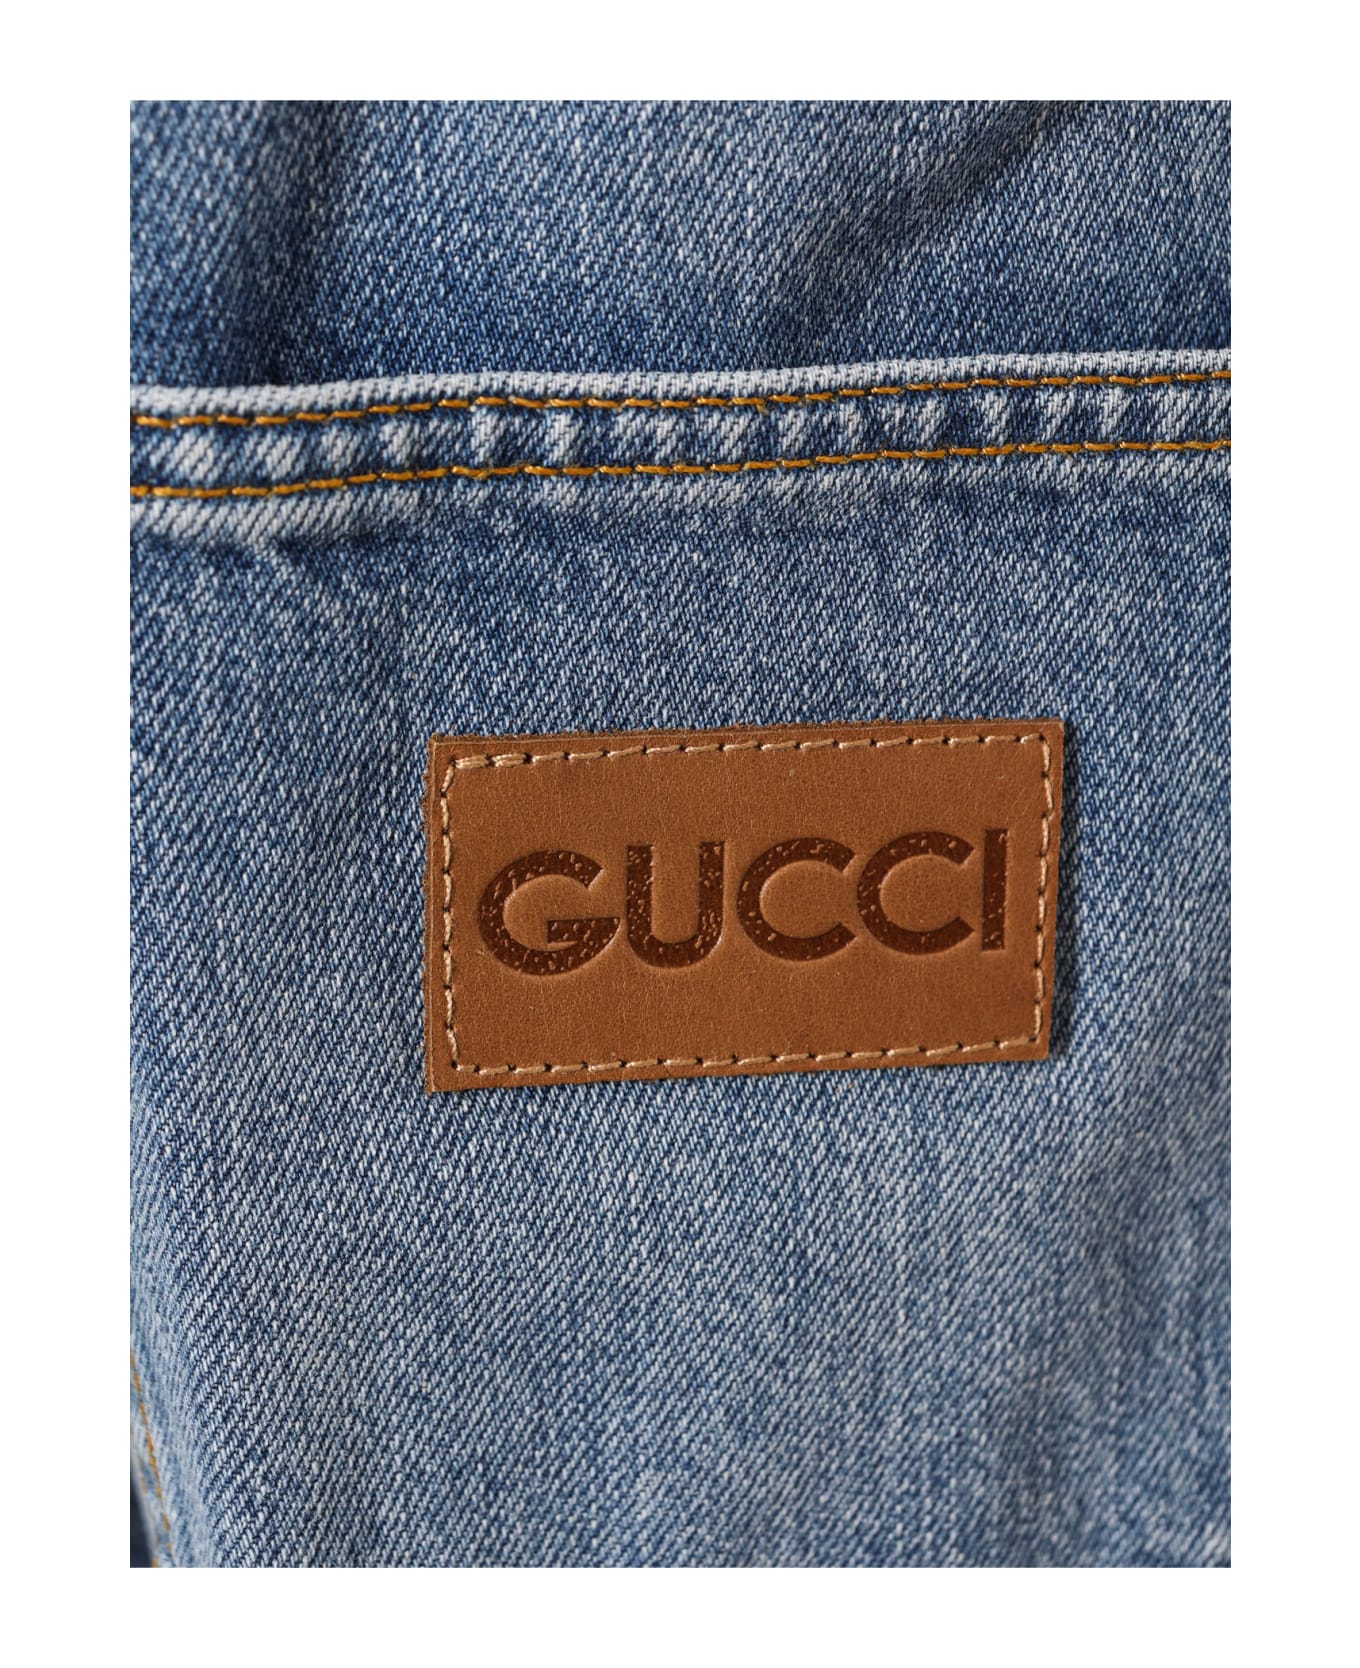 Gucci Relaxed-fitting Denim Jeans - Blue